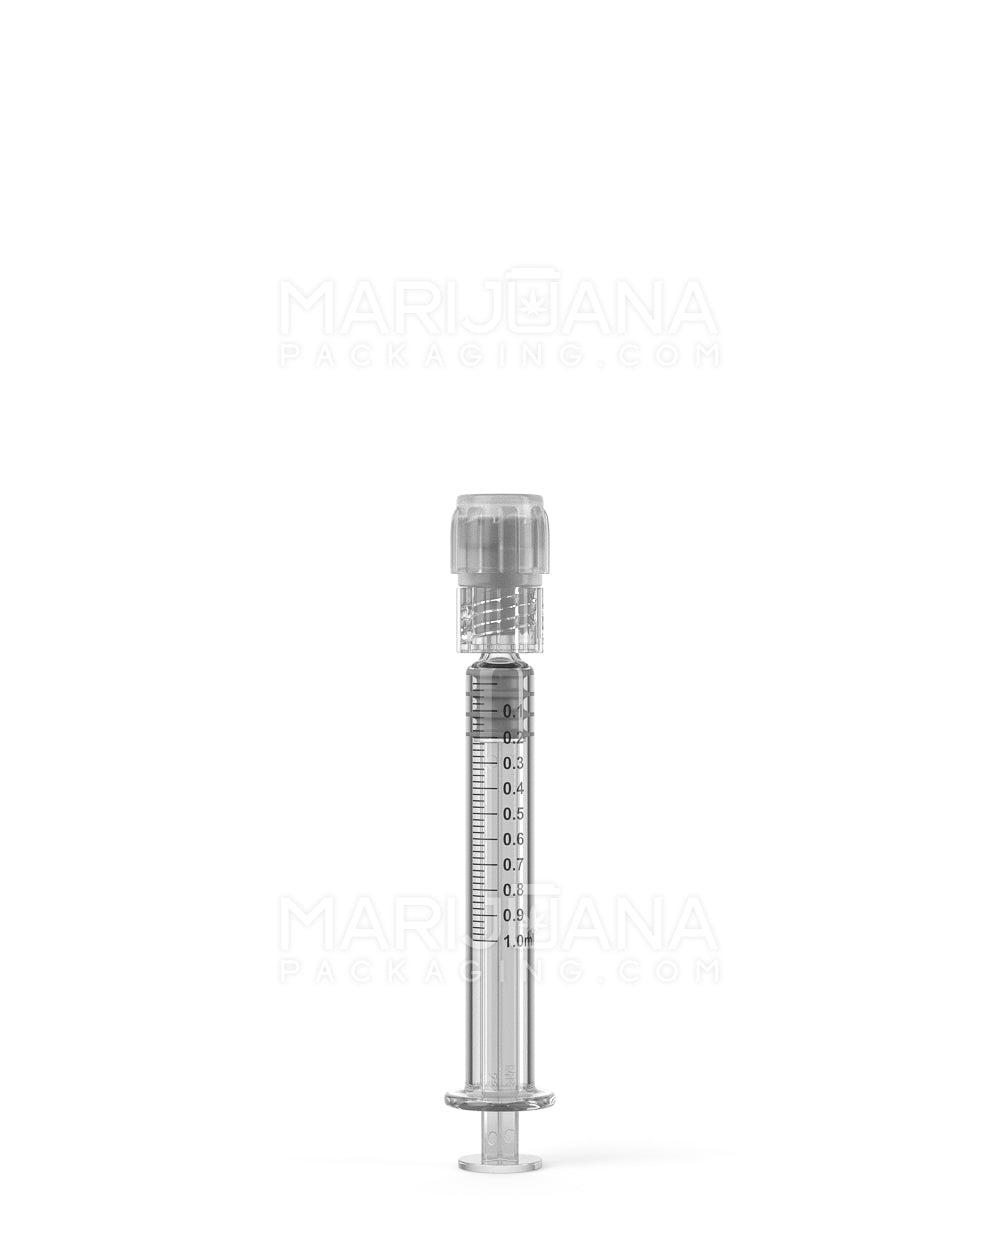 Child Resistant & Luer Lock | Long Glass Dab Applicator Syringes | 1mL - 0.1mL Increments - 100 Count - 8